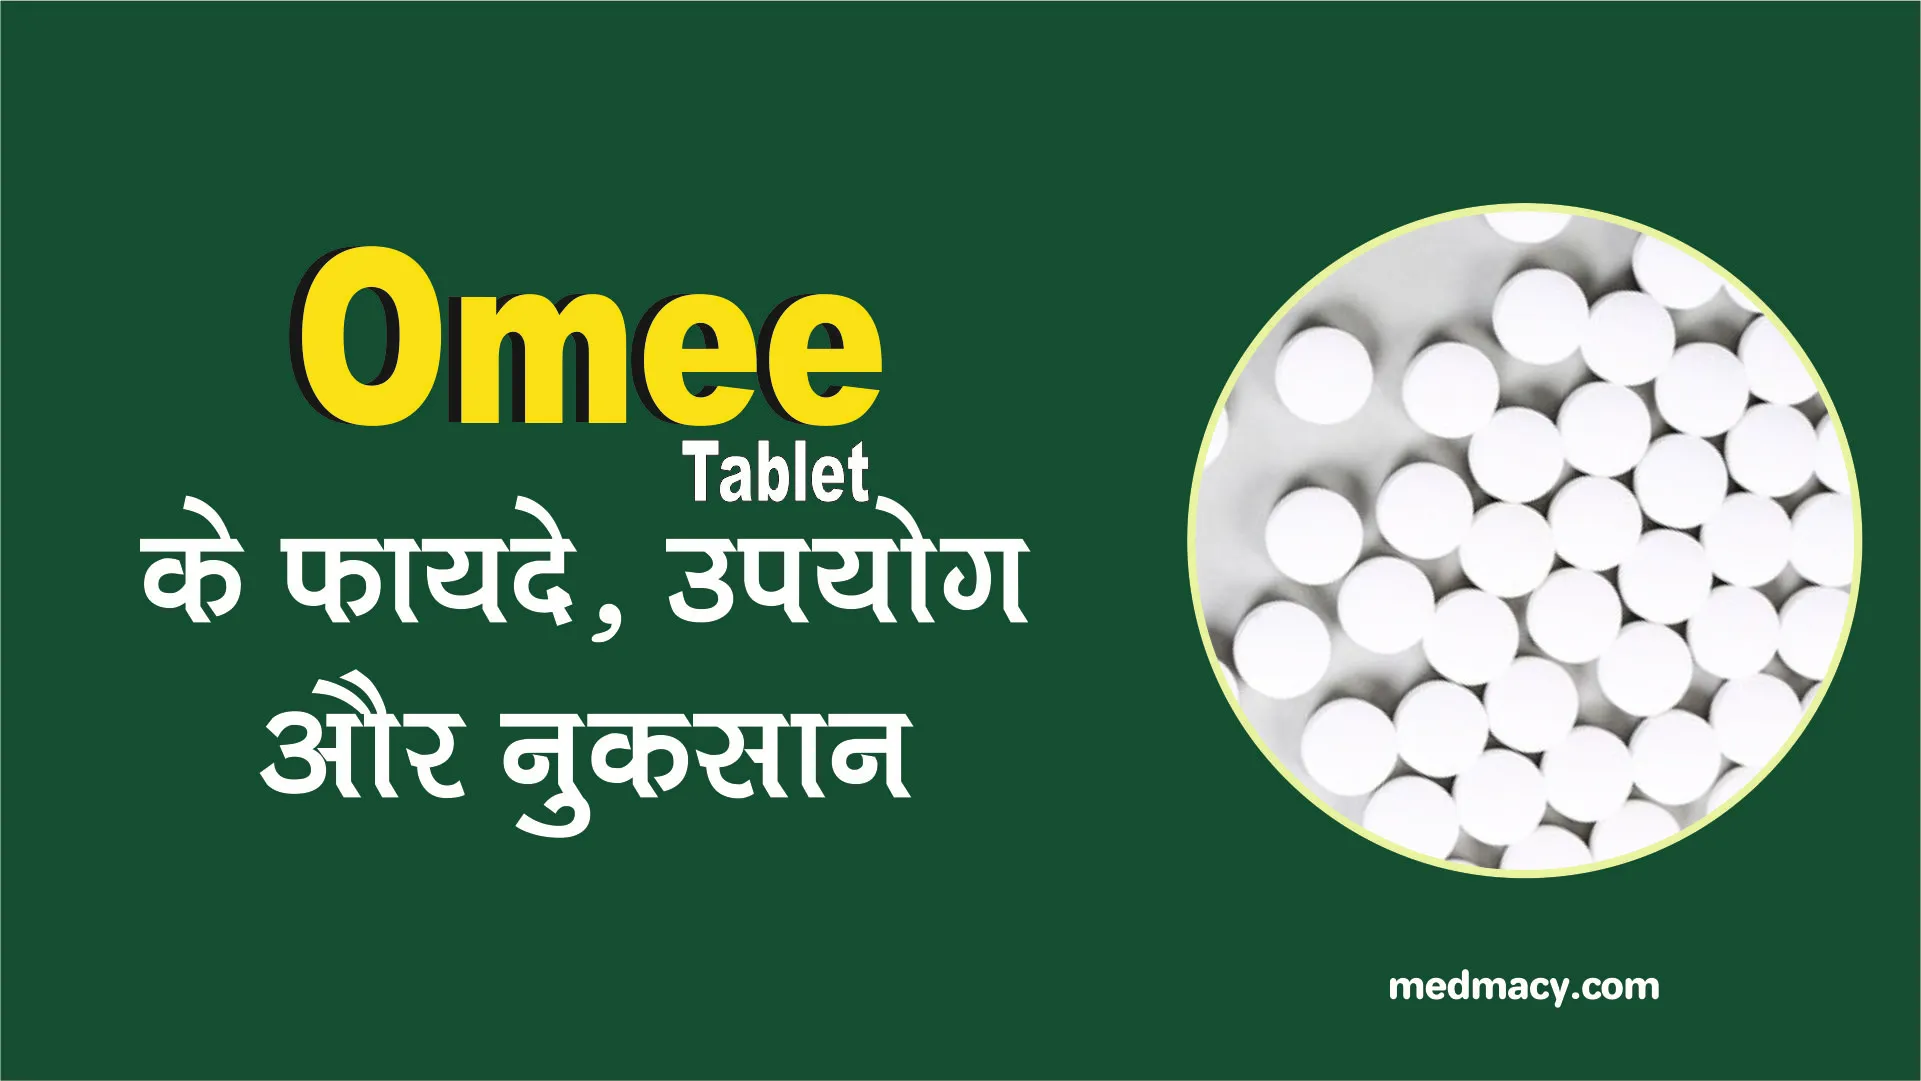 Omee Tablet Uses in Hindi